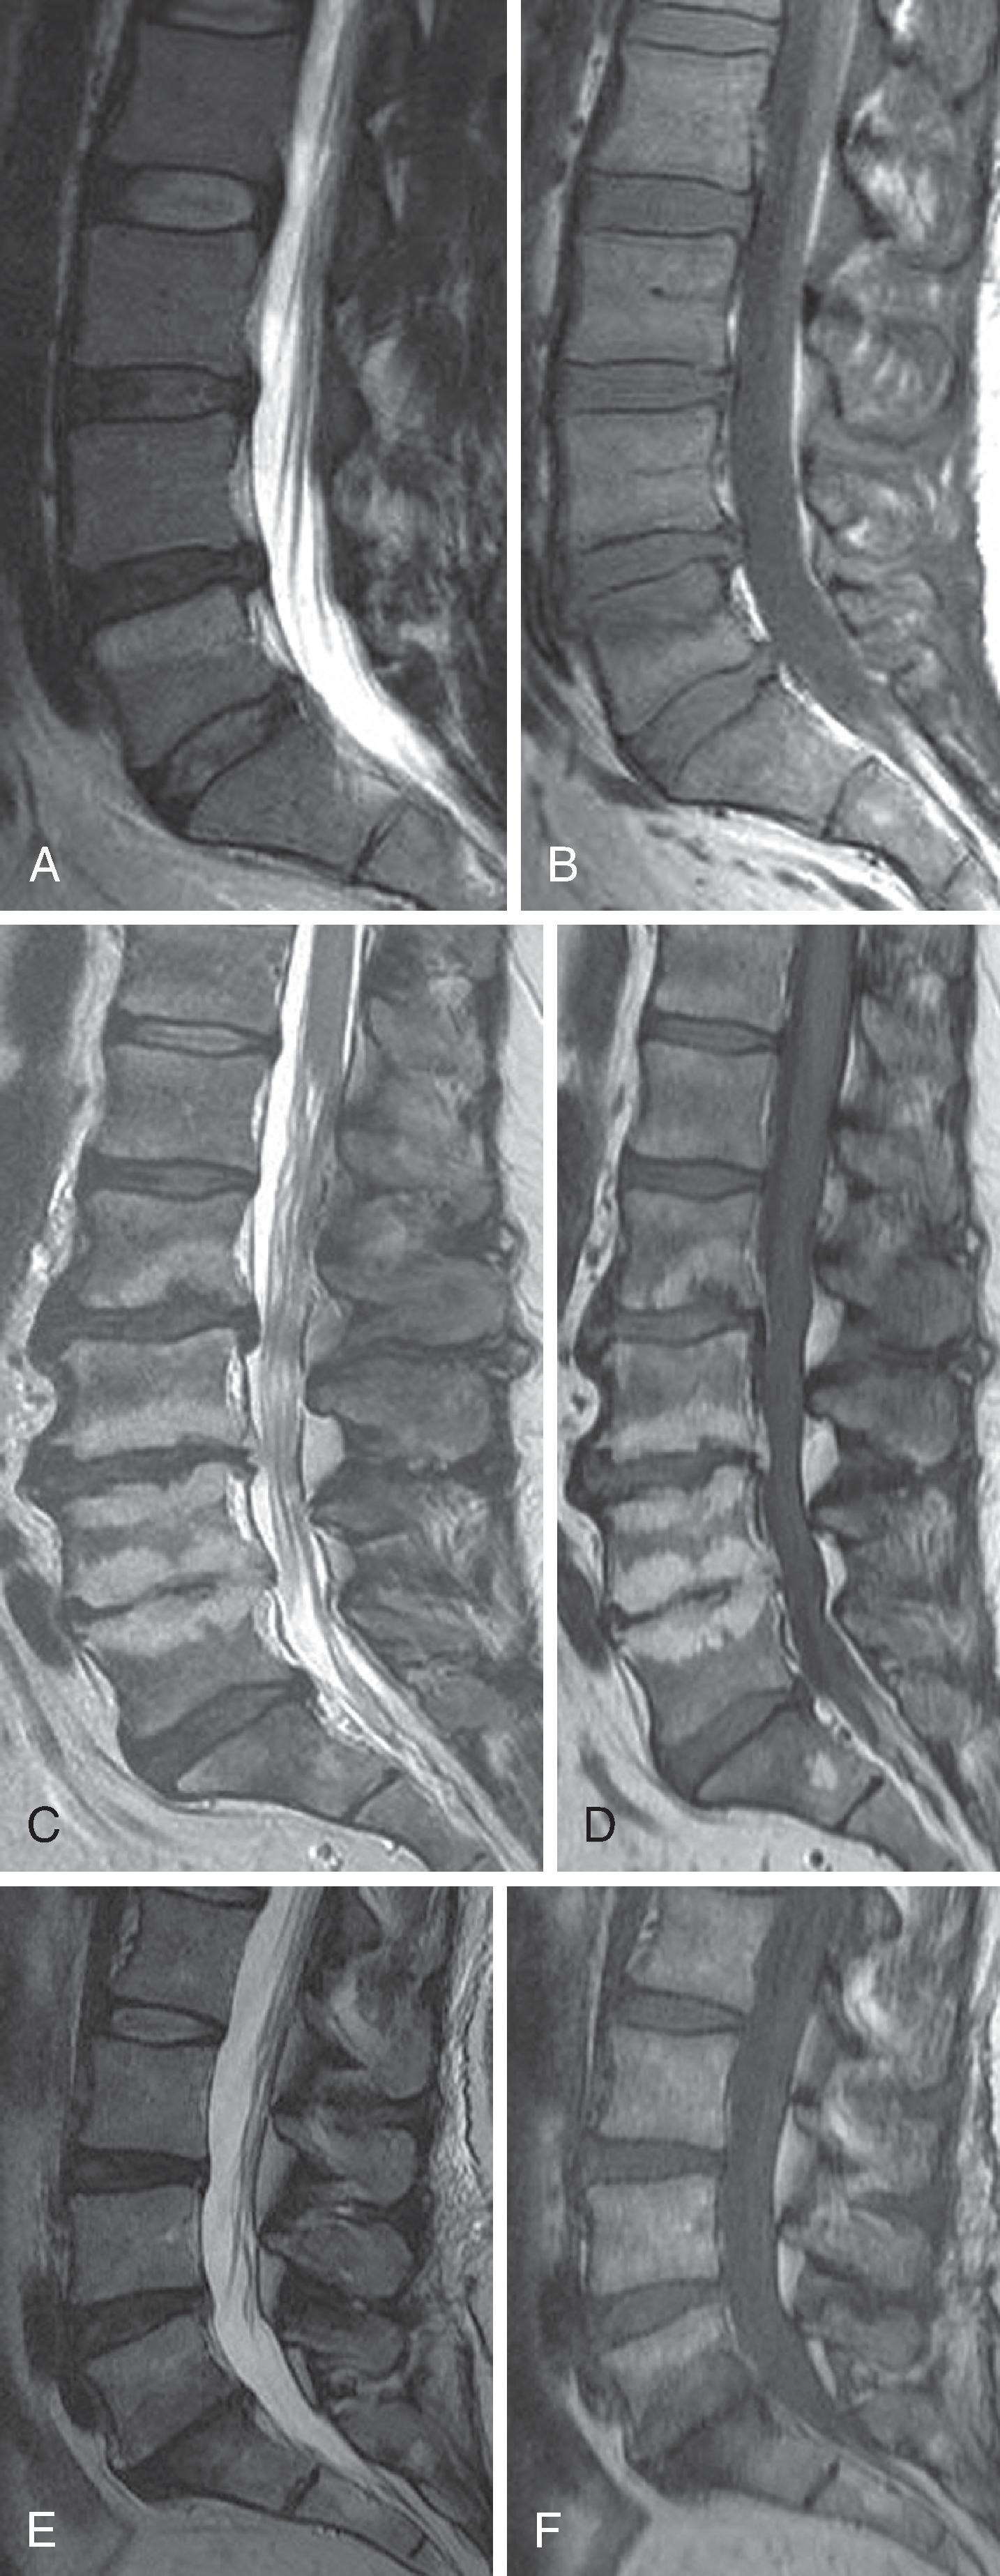 Figure 20.8, Modic endplate changes. Modic I sagittal T2 (A) and T1 (B) images demonstrate elevated T2 and diminished T1 signals involving the superior half of the L5 vertebral body. The histologic correlate of Modic I is vascularized granulation tissue. There are disc herniations at the L3–4 and L4–5 discs. Modic II sagittal T2 (C) and T1 (D) images reveal elevated T1 and T2 signals in the sub-endplate marrow involving L2–L5. The histologic correlate of Modic II is fatty infiltration. Modic III sagittal T2 (E) and T1 (F) images show diminished T2 and T1 signals in the sub-endplate marrow about the L5 interspace. The histologic correlate of Modic III is sclerotic bone.